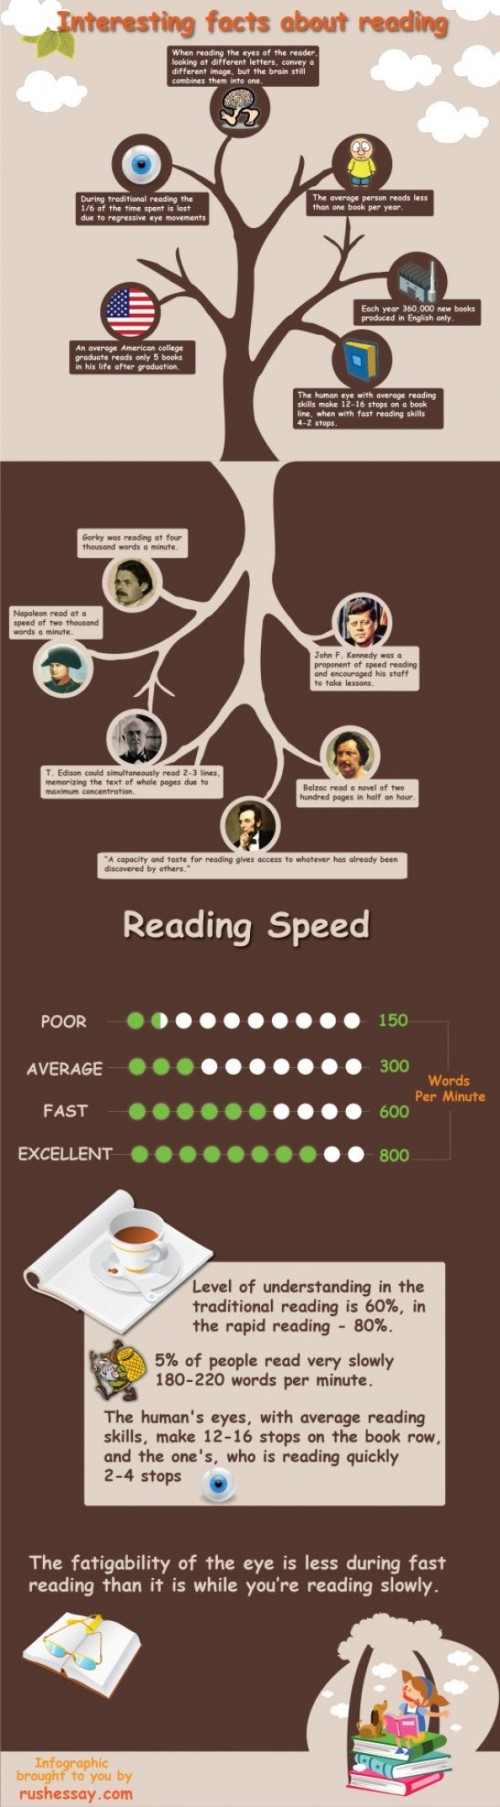 interesting-facts-about-reading_50290ee6a6406_w594